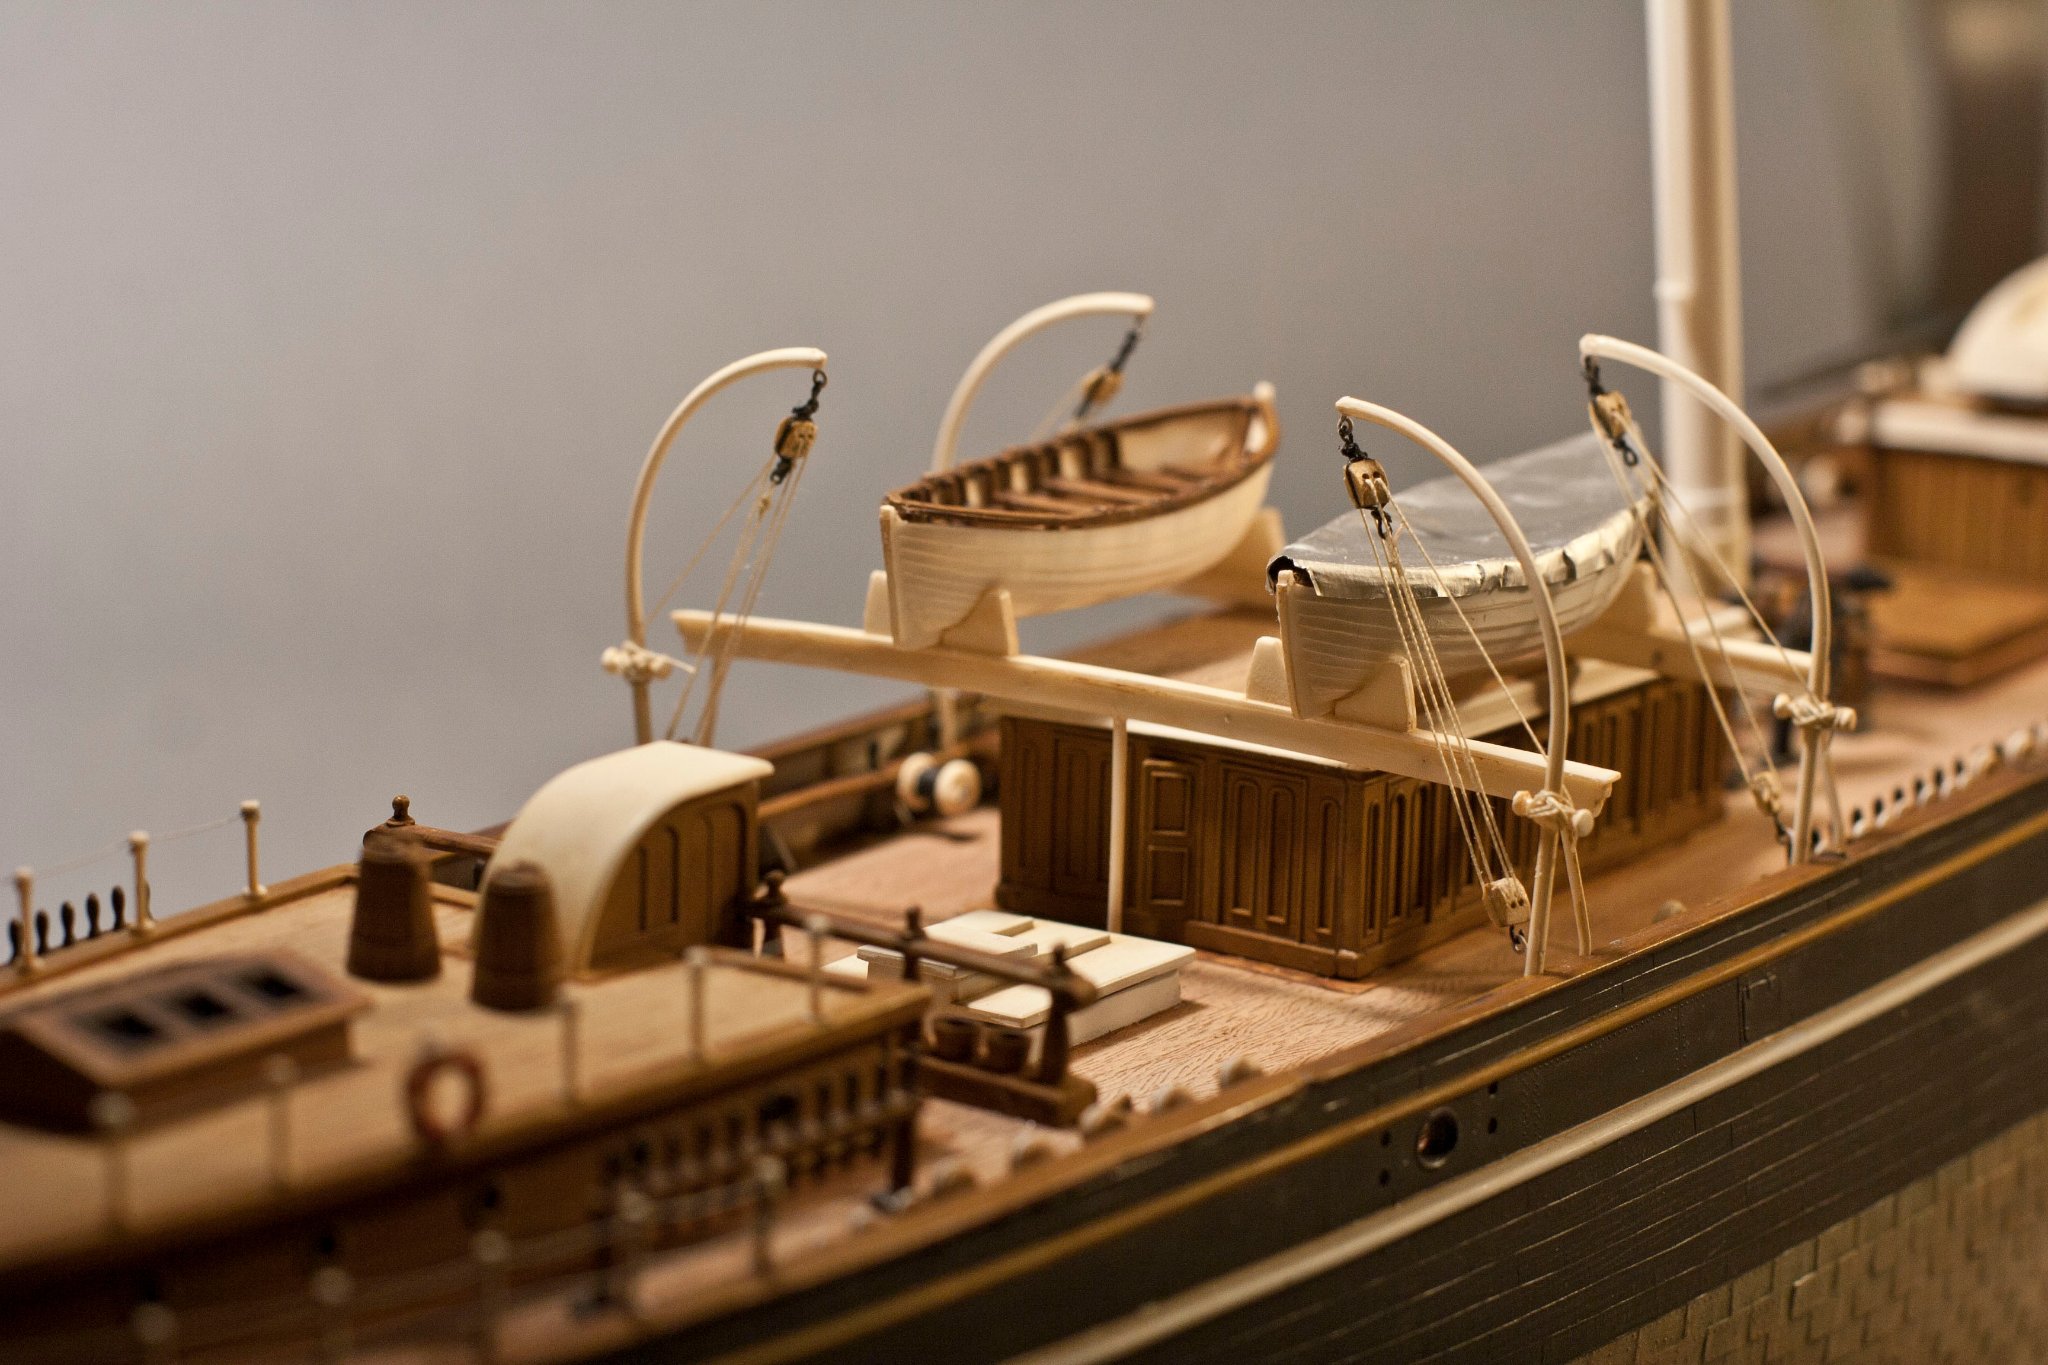 Cutty Sark by bcochran - Revell - 1/96 - - Kit build logs for subjects  built from 1851 - 1900 - Model Ship World™